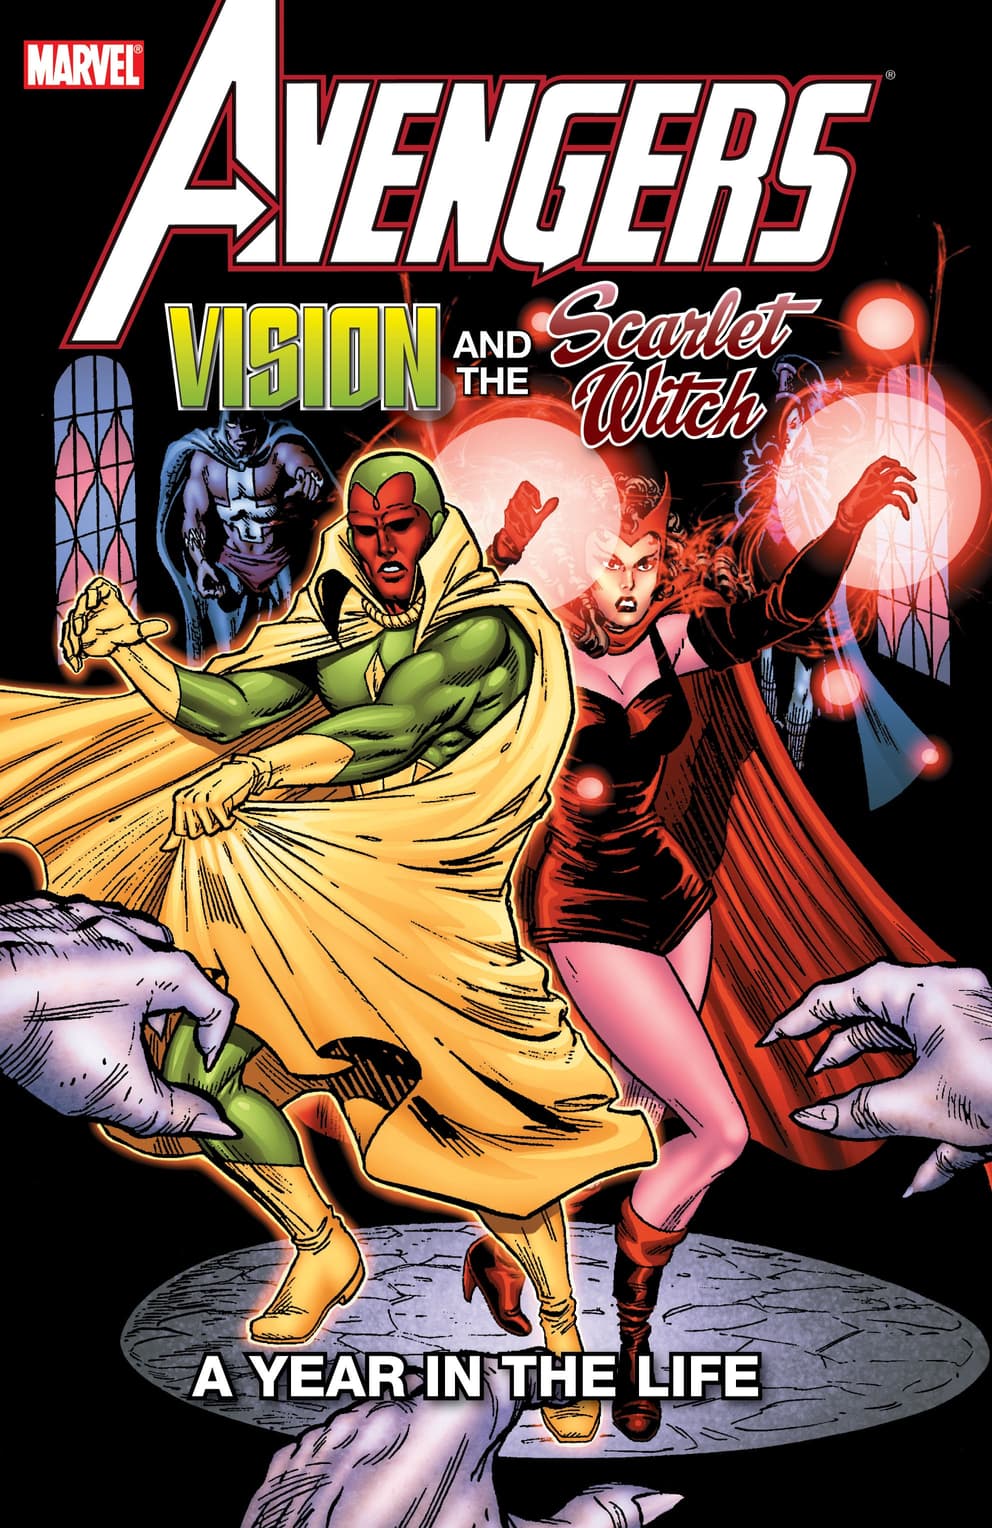 AVENGERS: VISION AND THE SCARLET WITCH: A YEAR IN THE LIFE_Cover